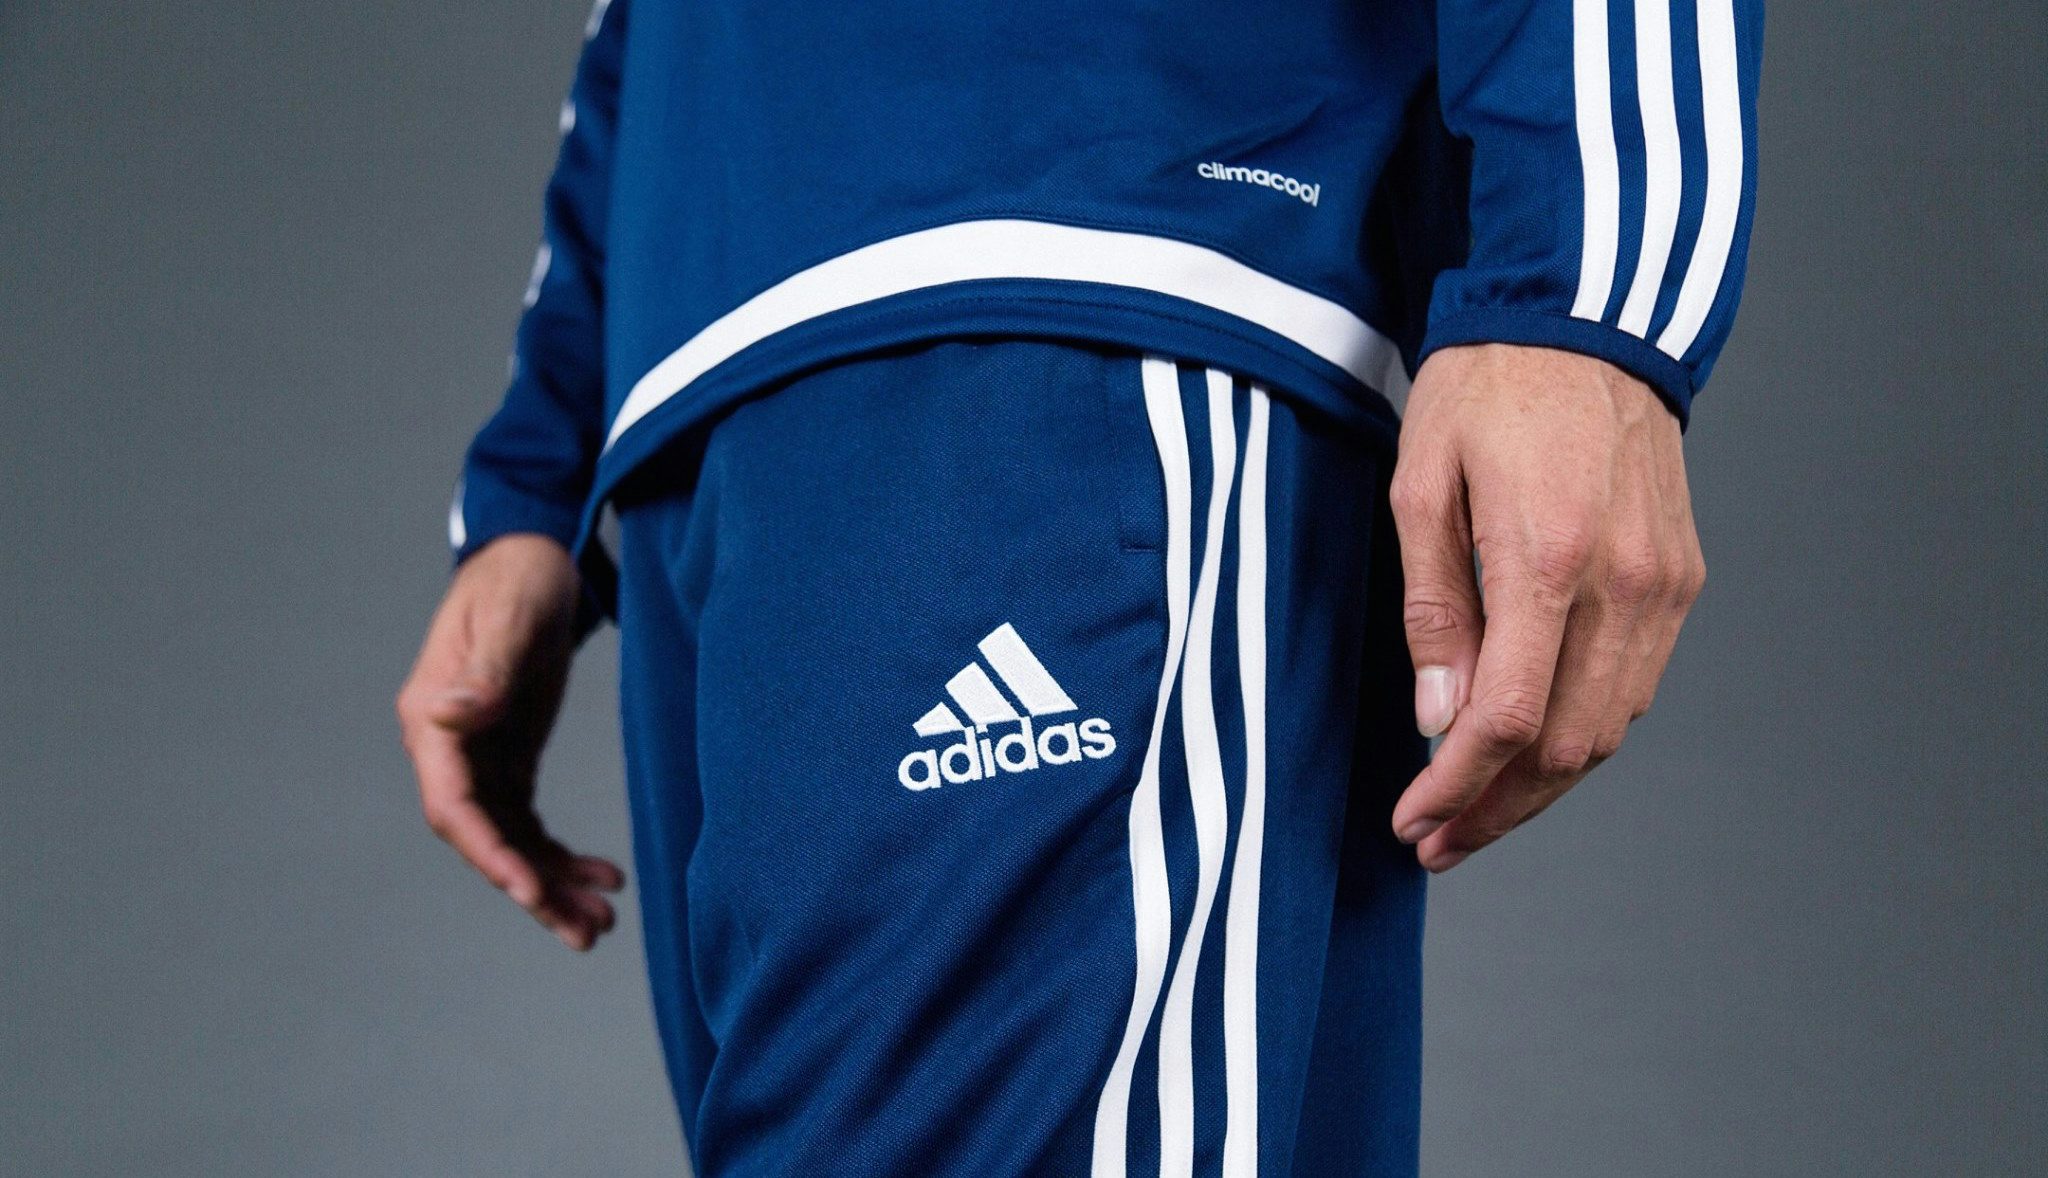 adidas with stripes only on one side